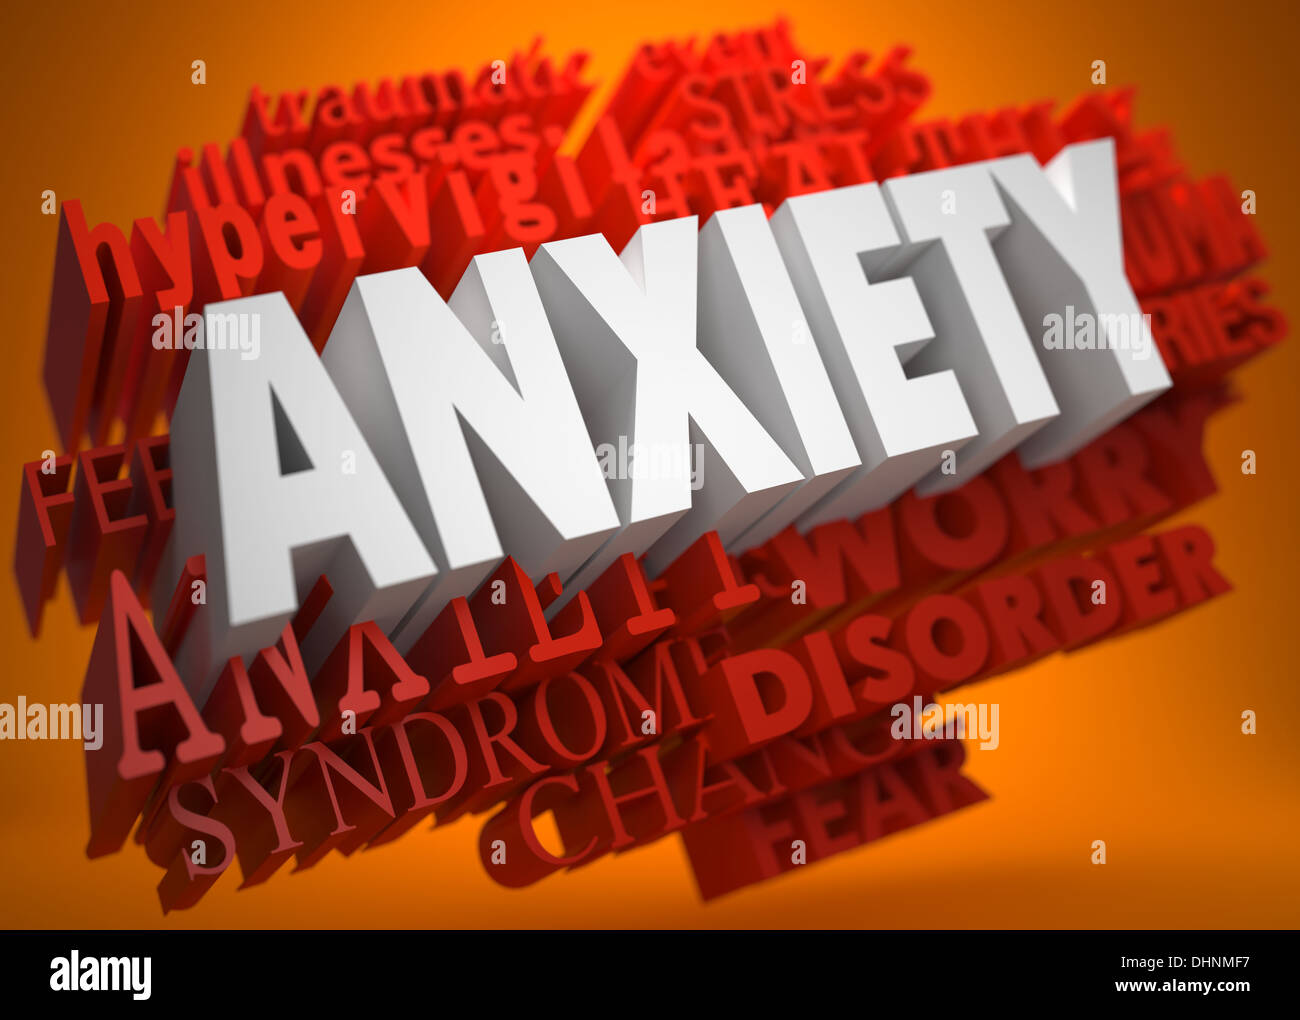 Anxiety Concept. Stock Photo